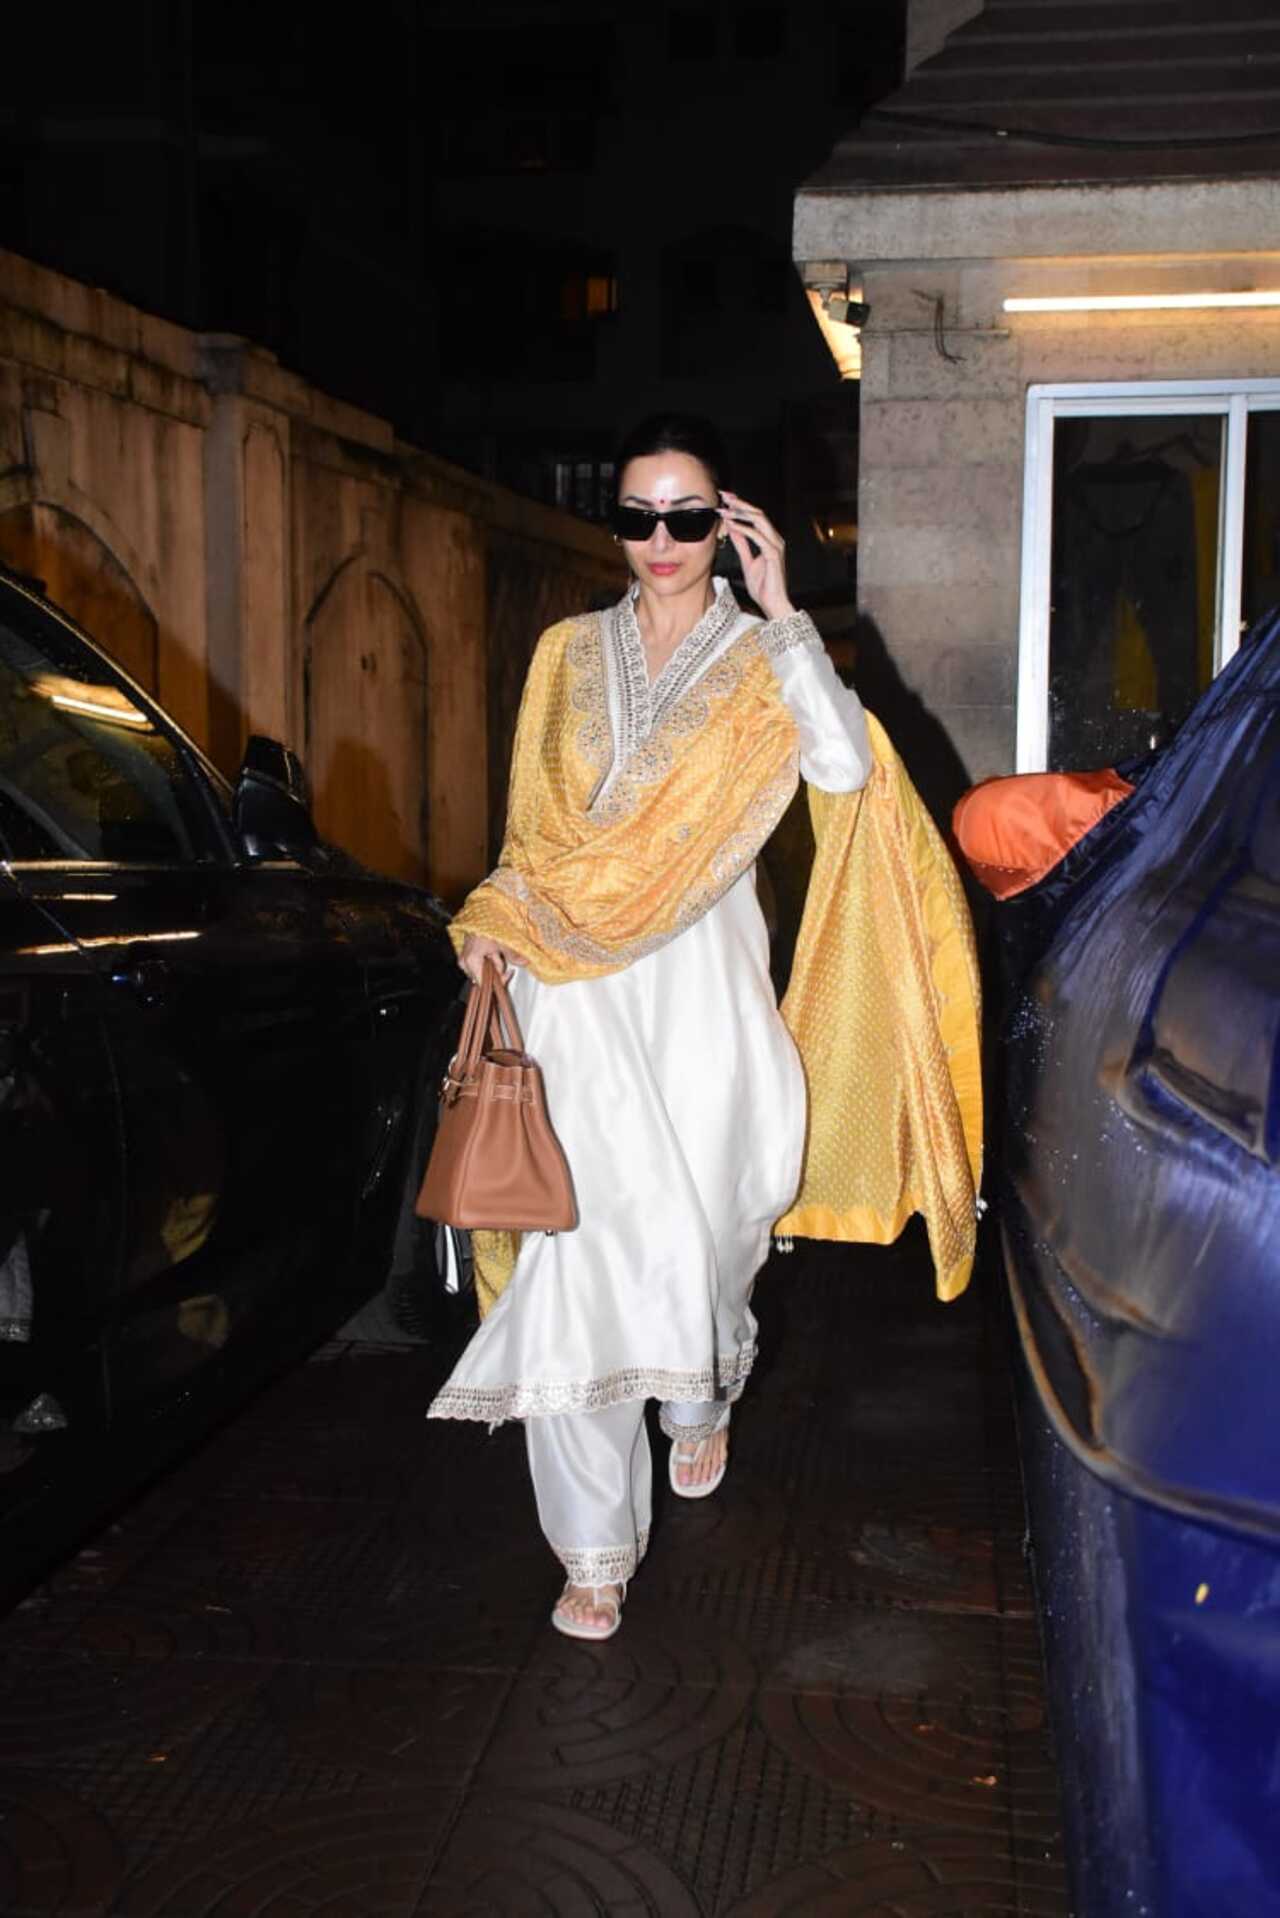 Malaika Arora was clicked outside her mother's residence this evening after celebrating Onam